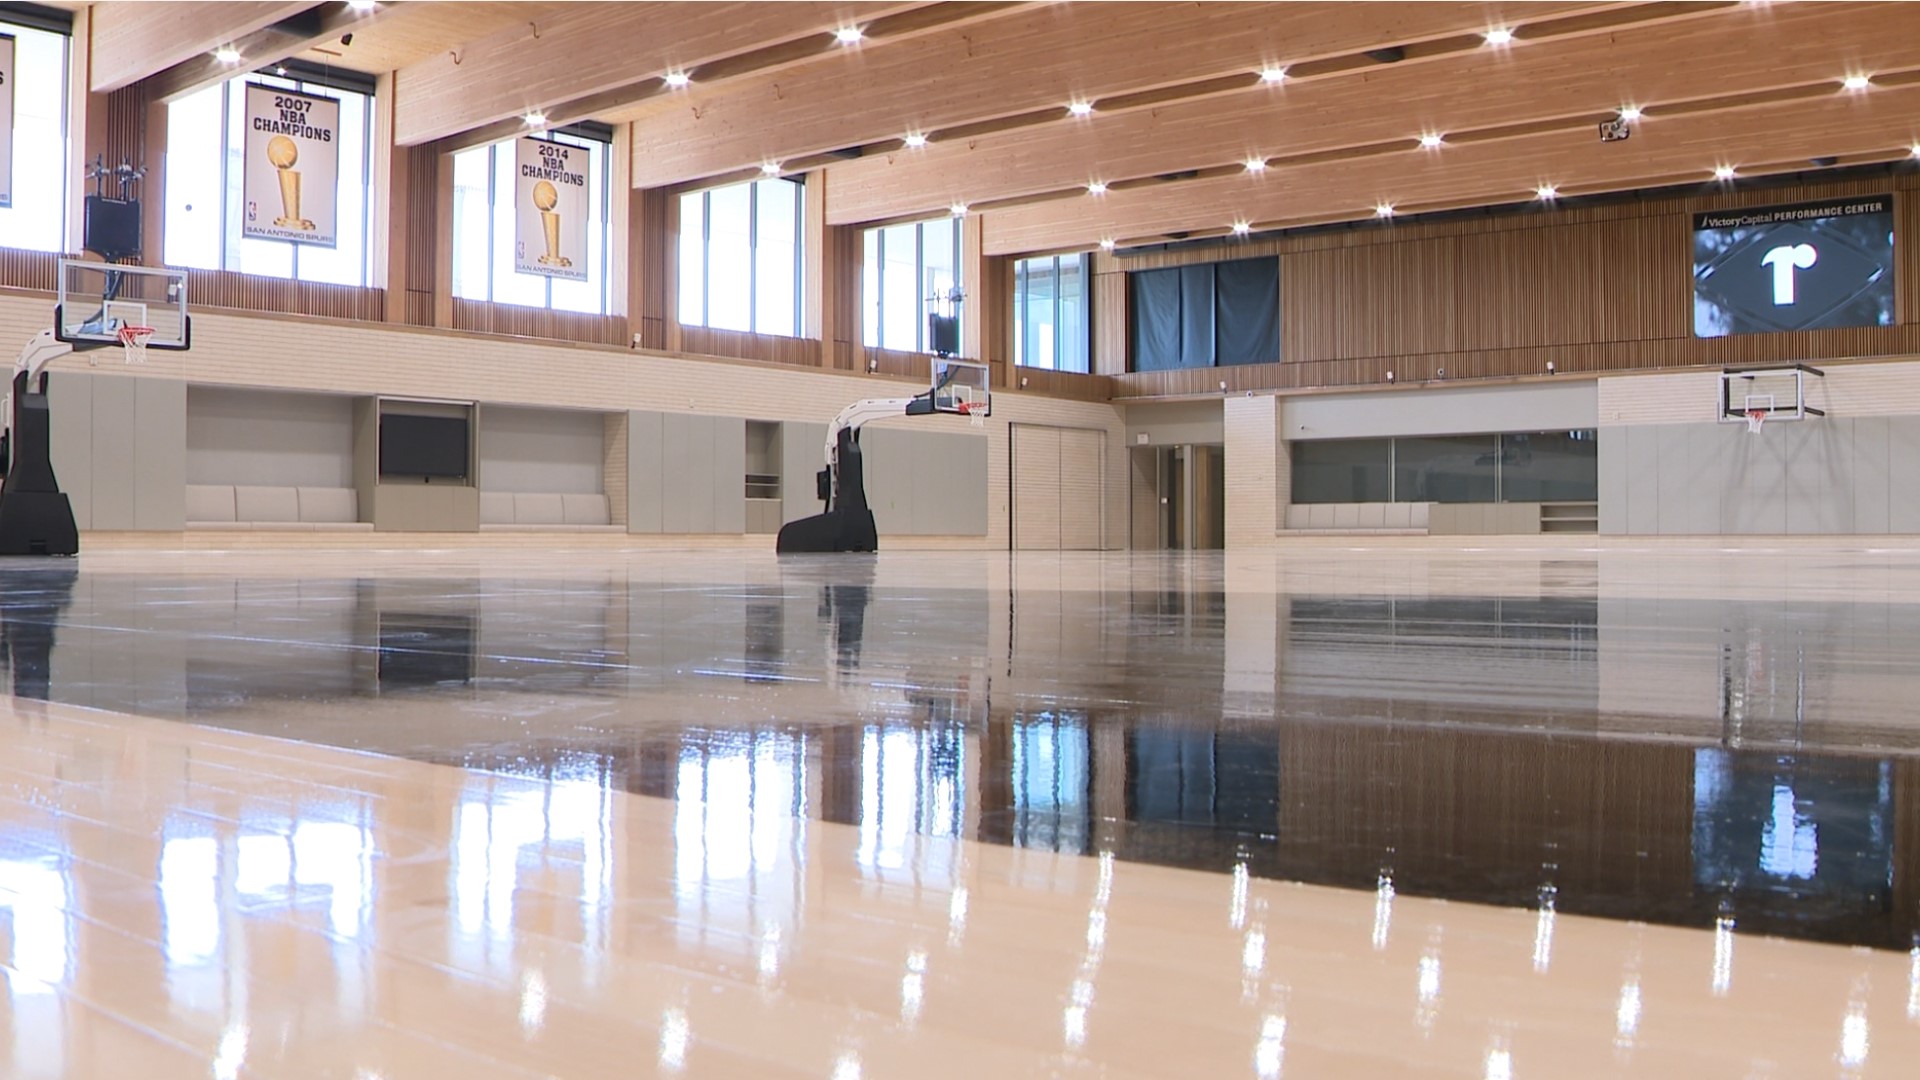 FIRST LOOK: Inside the Spurs' new practice facility 'Victory